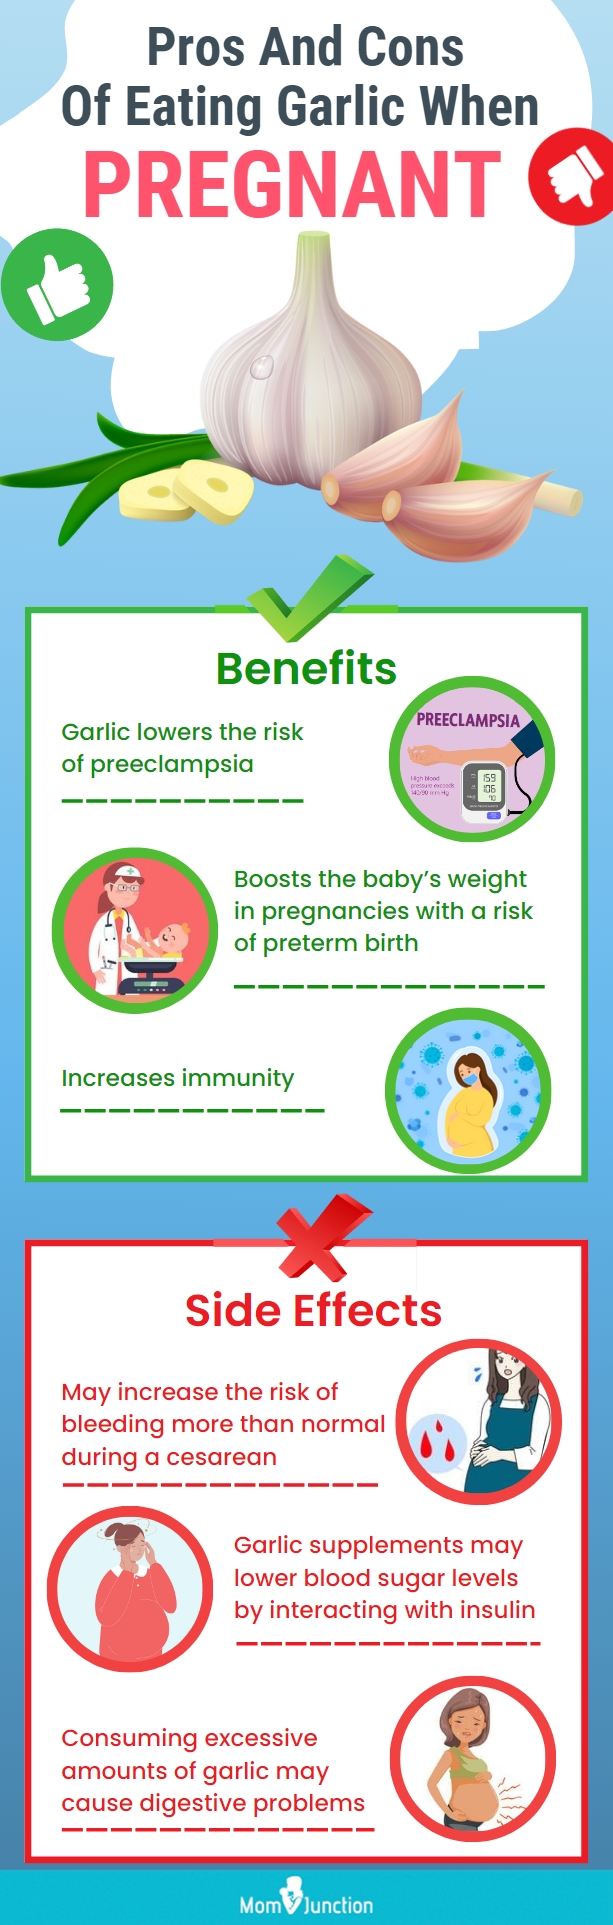 pros and cons of eating garlic when pregnant [infographic]